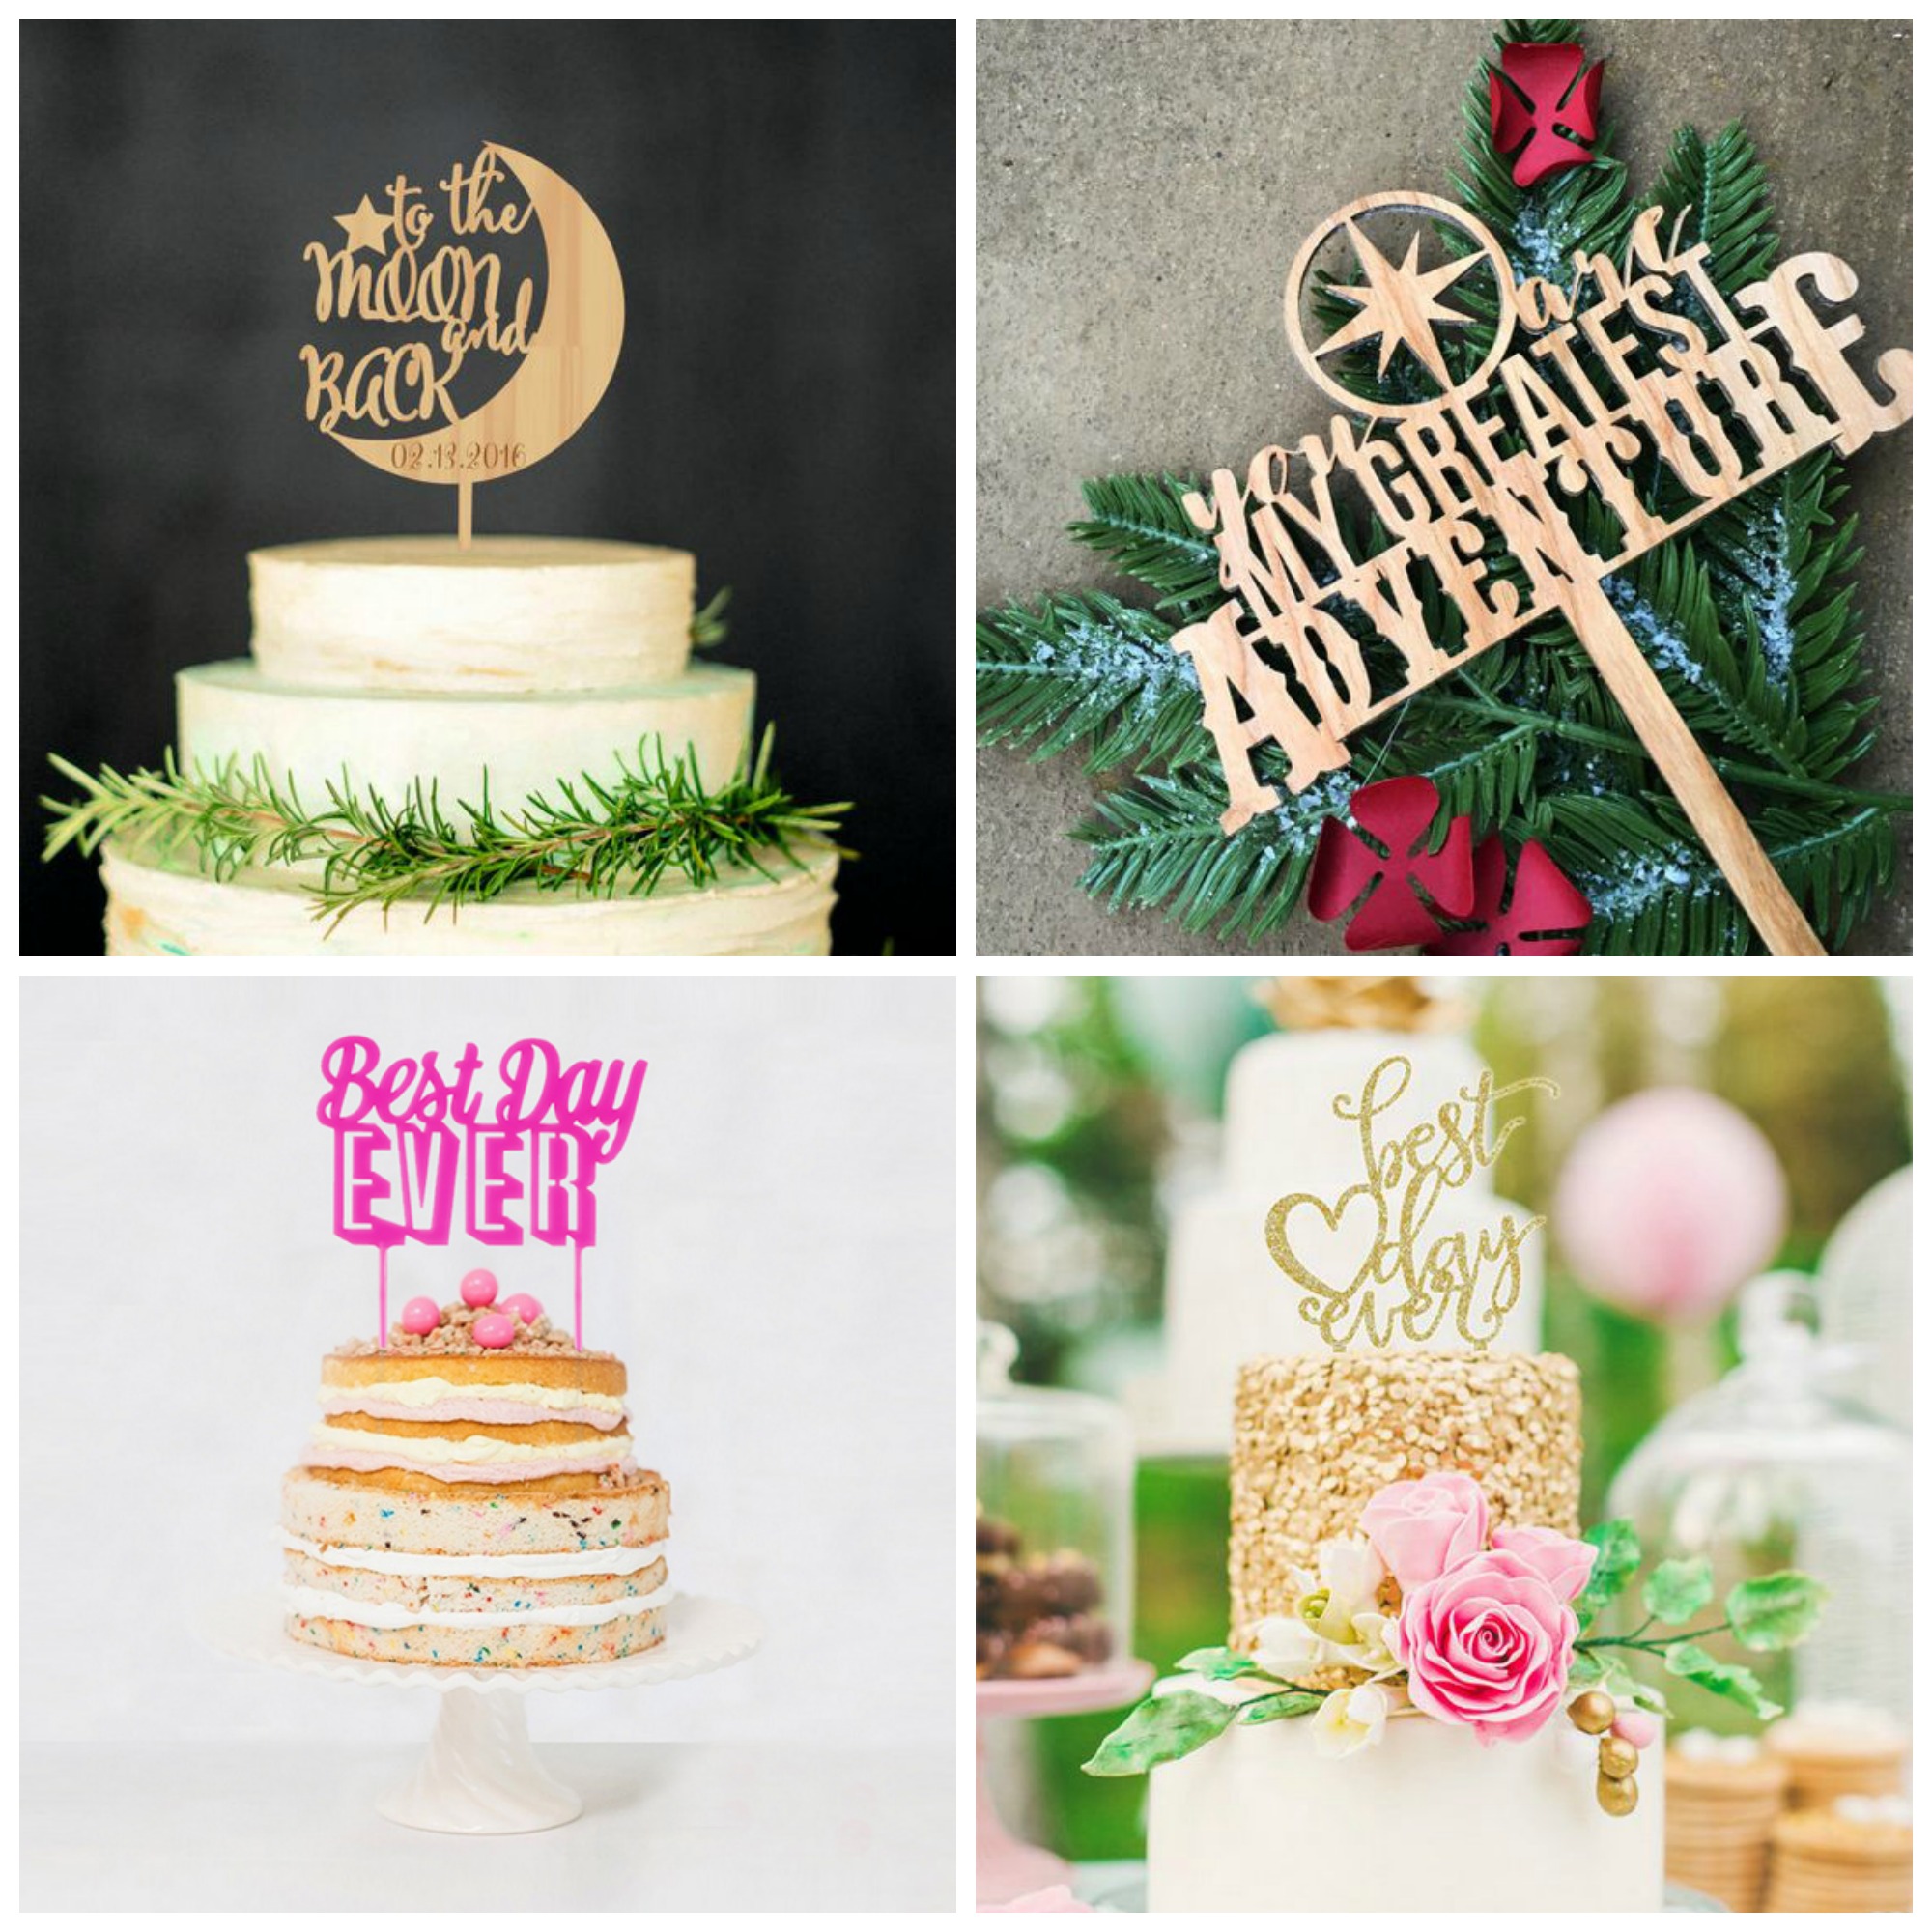 19 Of The Cutest Wedding Cake Topper Ideas Ever